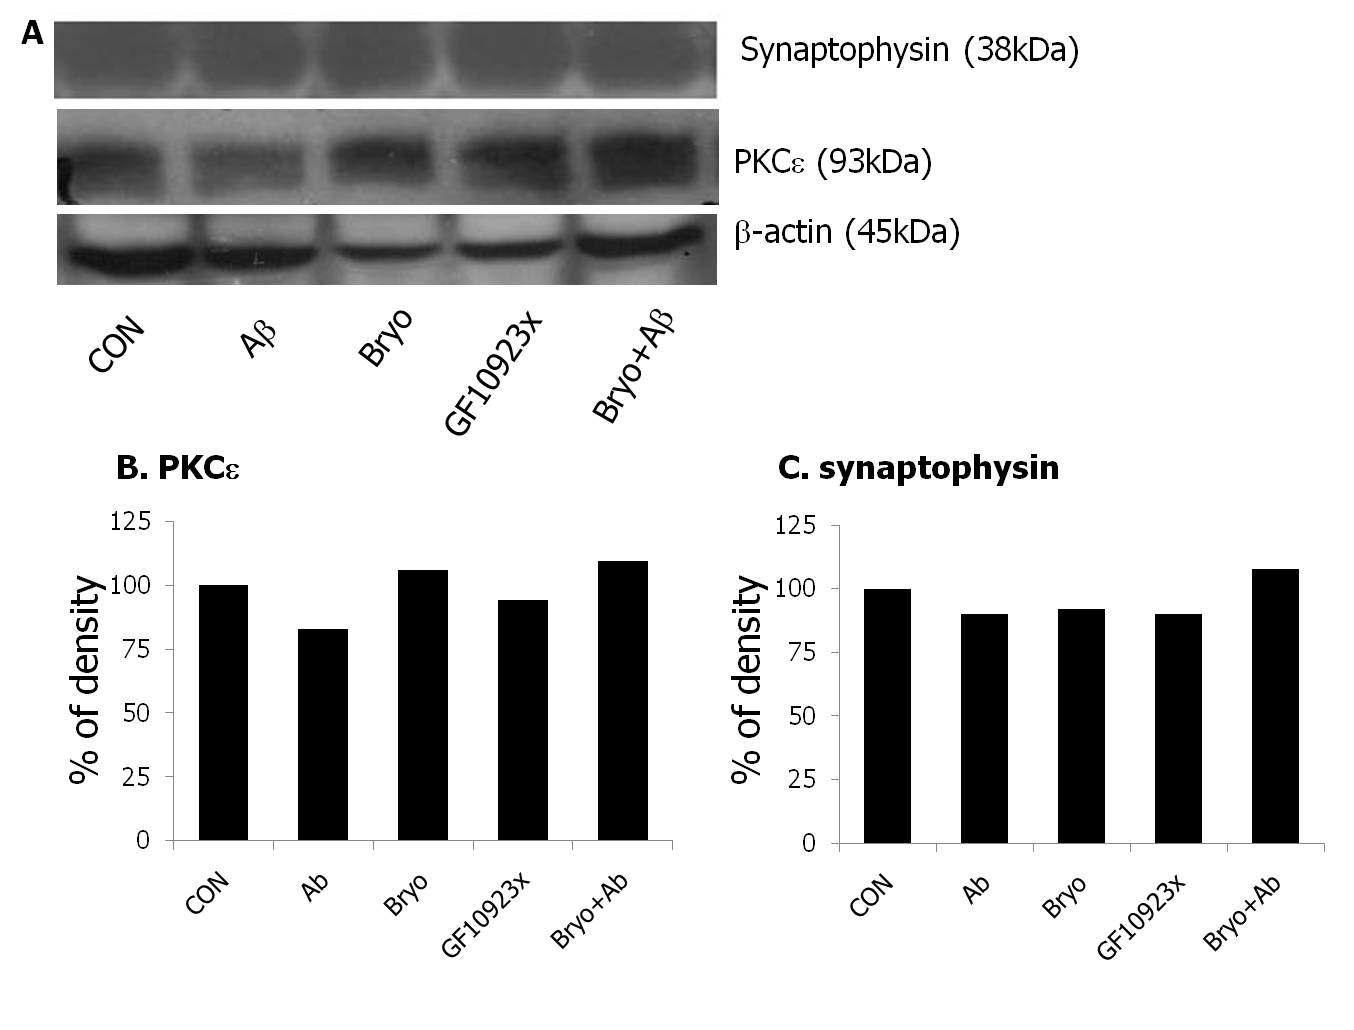 Expression of PKCε, and synaptophysin in Aβ, GF10923x, and bryostatin-I treated hippocampus. (A) Detection of PKCε, and synaptophysin at protein levels by western blot analysis, (B) Quantitative densitometric analysis of PKCε, and (C) Quantitative densitometric analysis of synaptophysin.